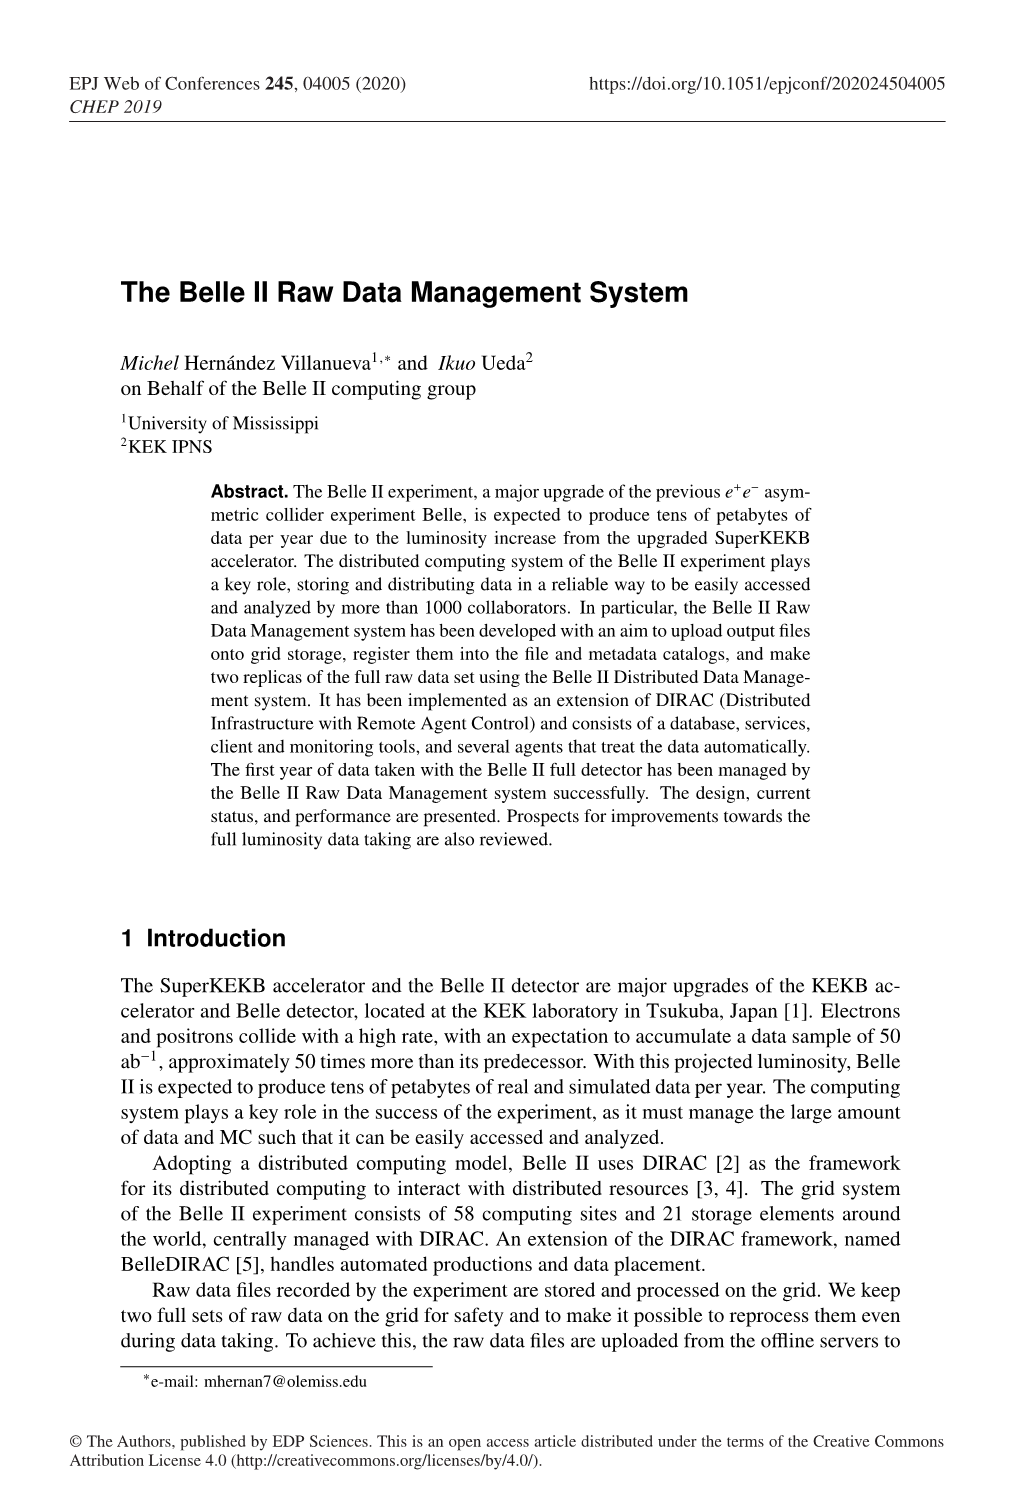 The Belle II Raw Data Management System